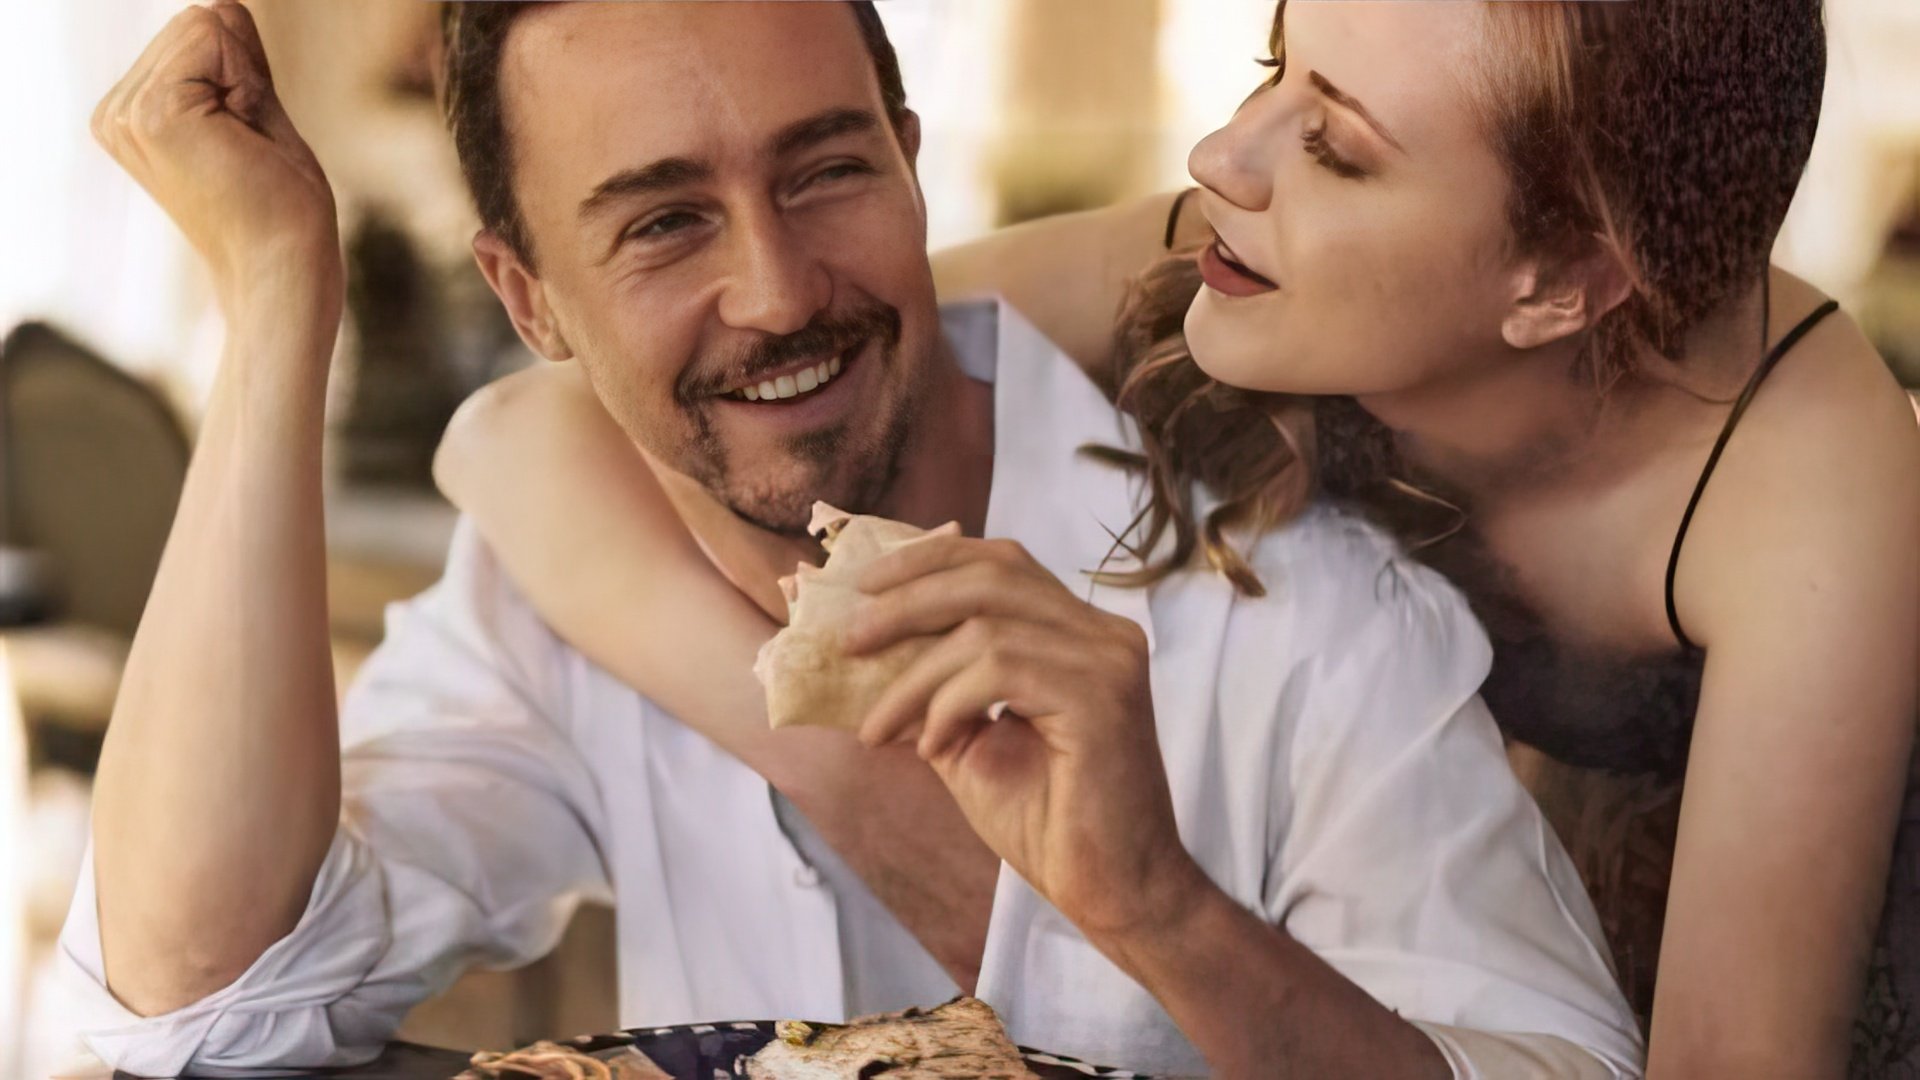 Edward Norton and Rachel Wood were dating in real life